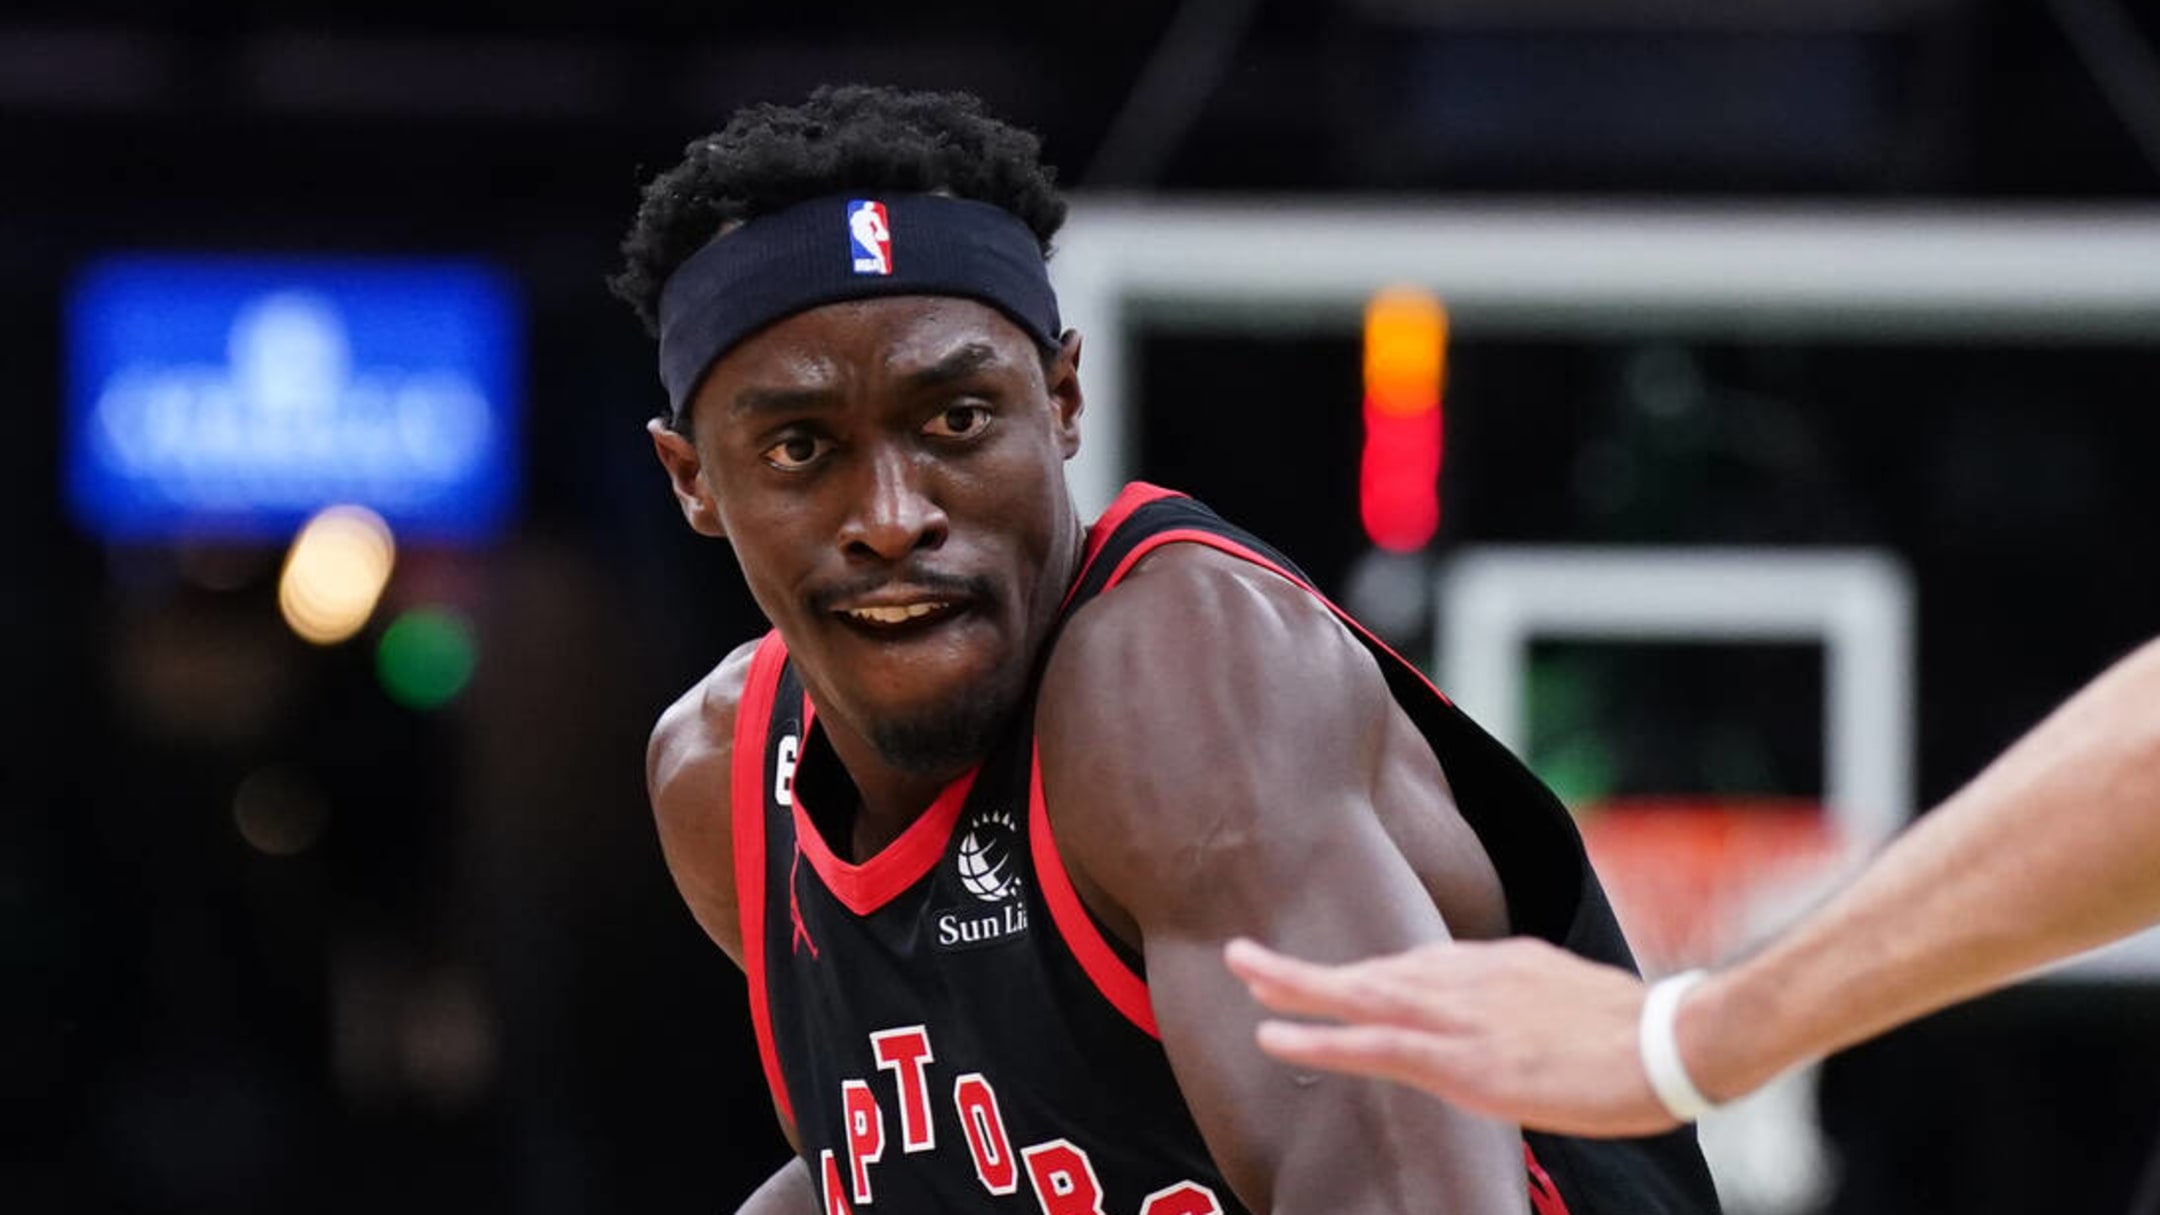 Pascal Siakam: The Inspiring Story of One of Basketball's Rising